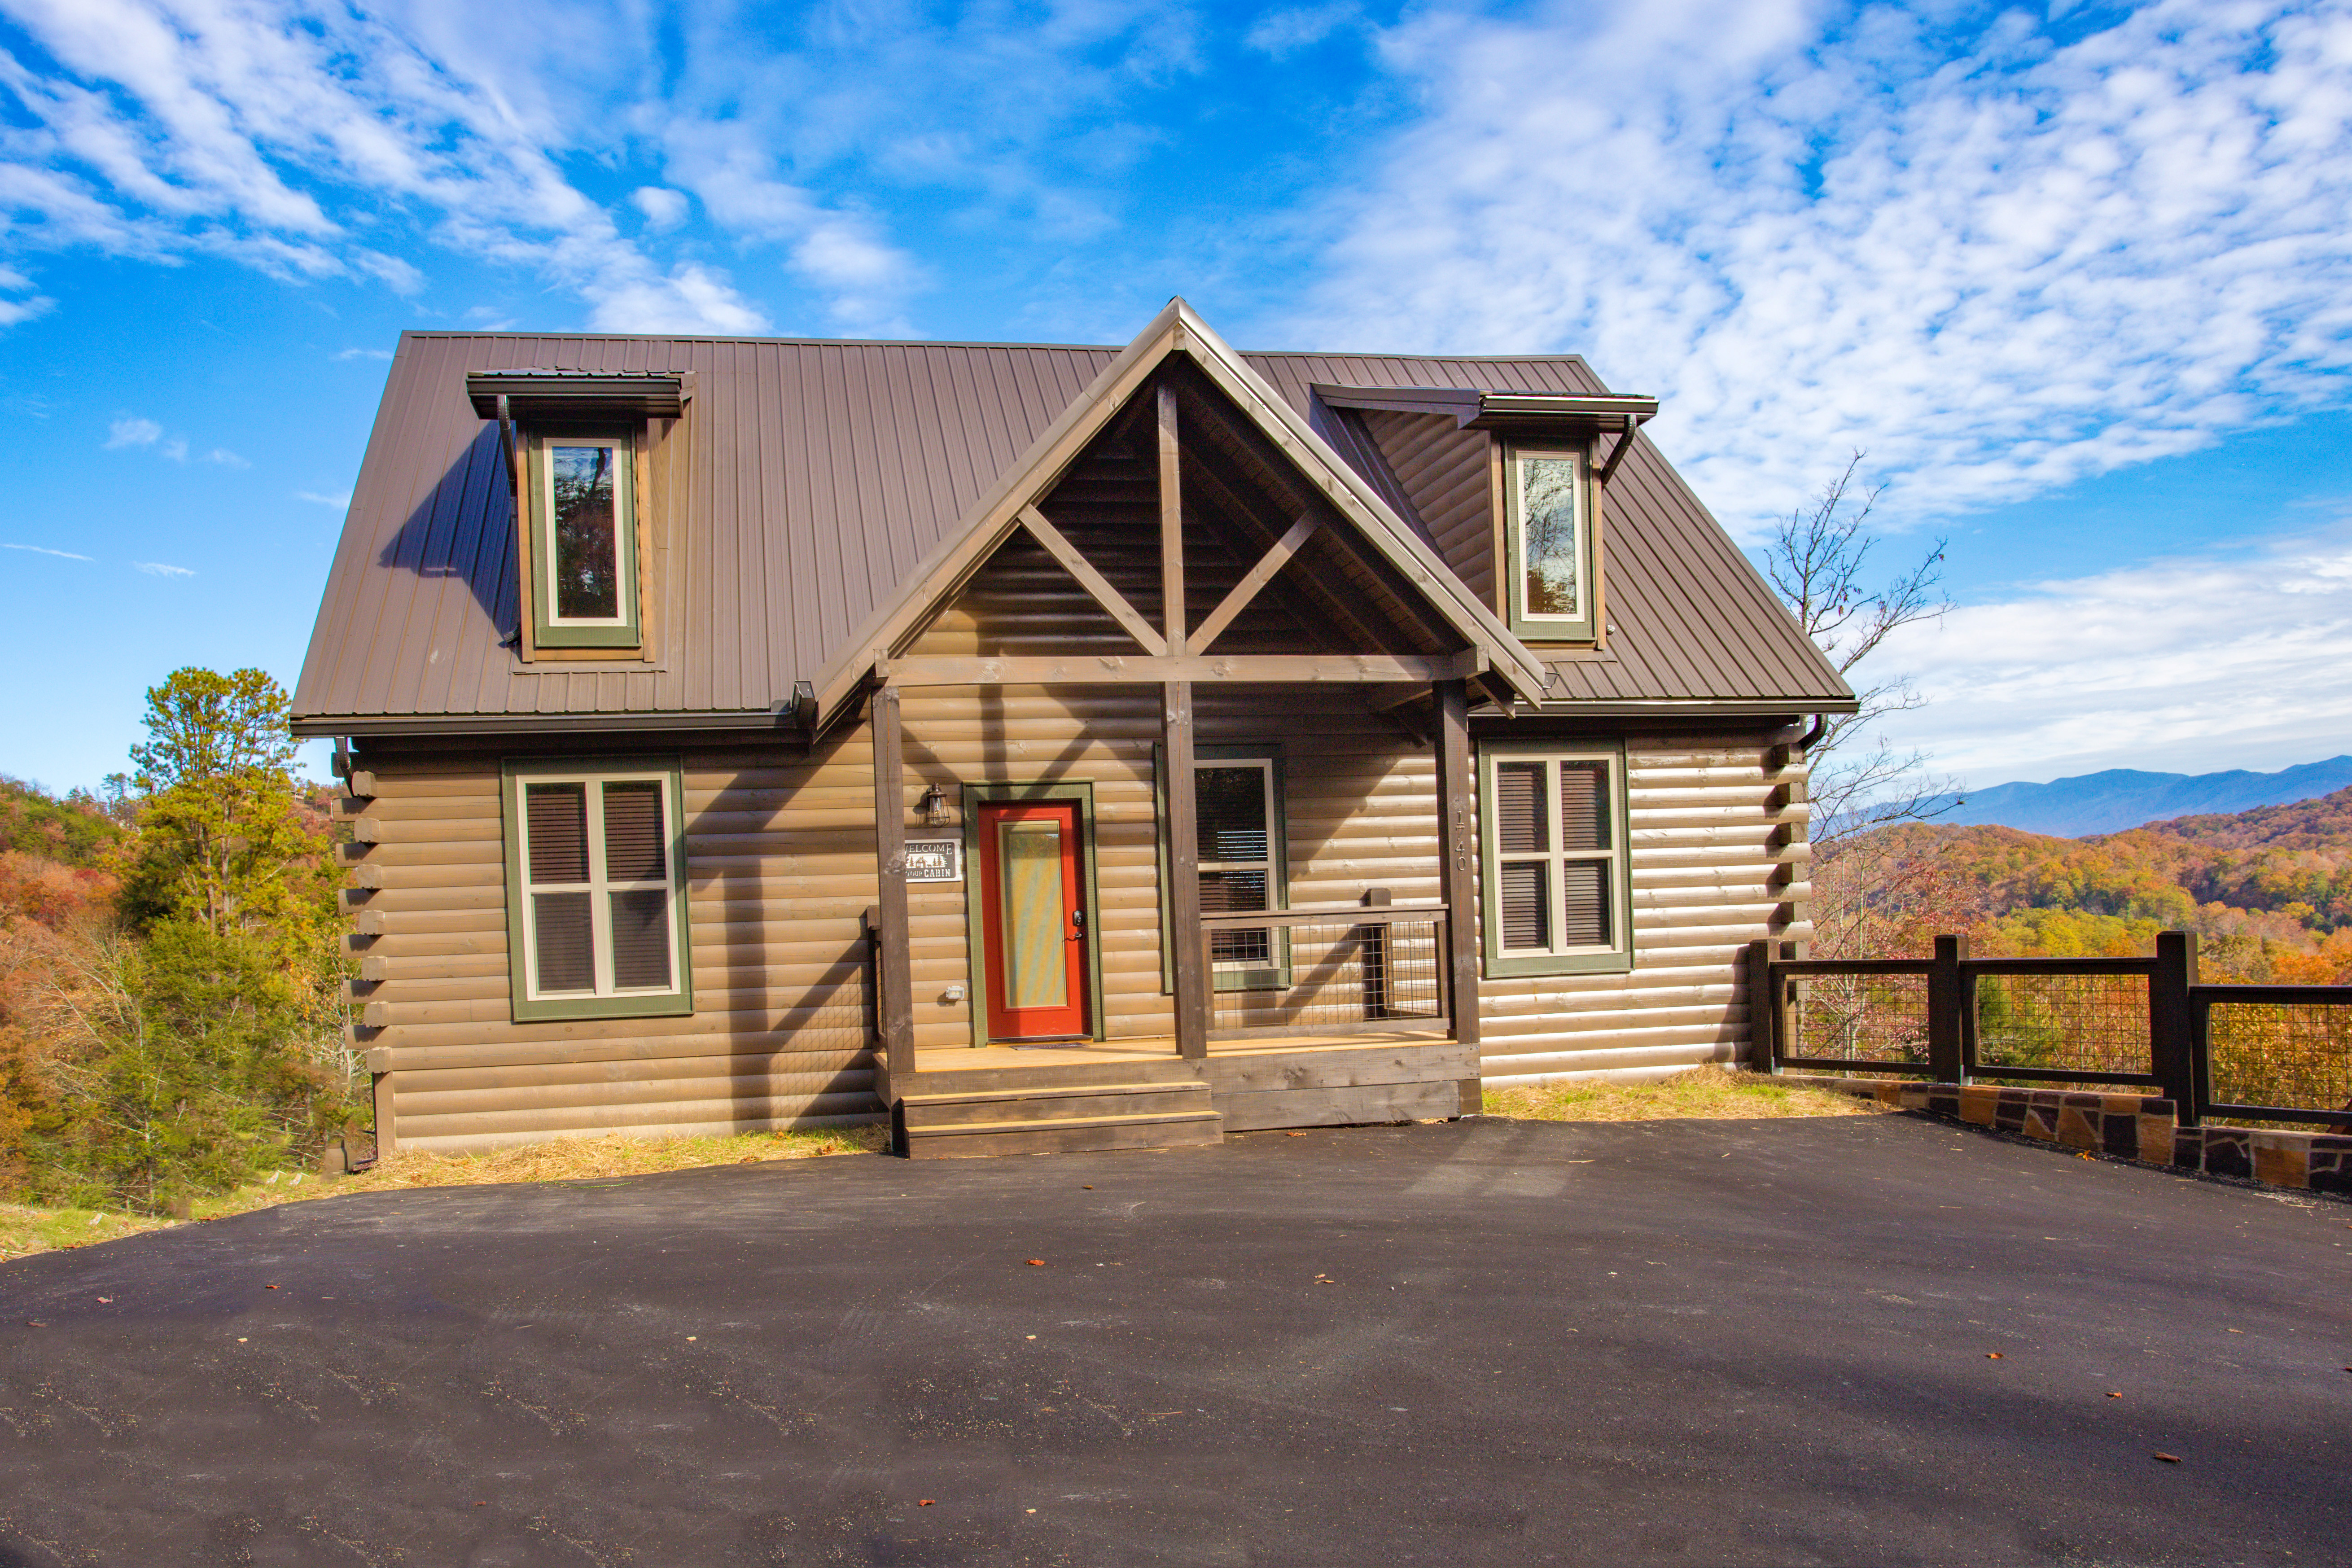 Awesome Star Splash : 2 Bedroom Vacation Cabin For Rent Sevierville